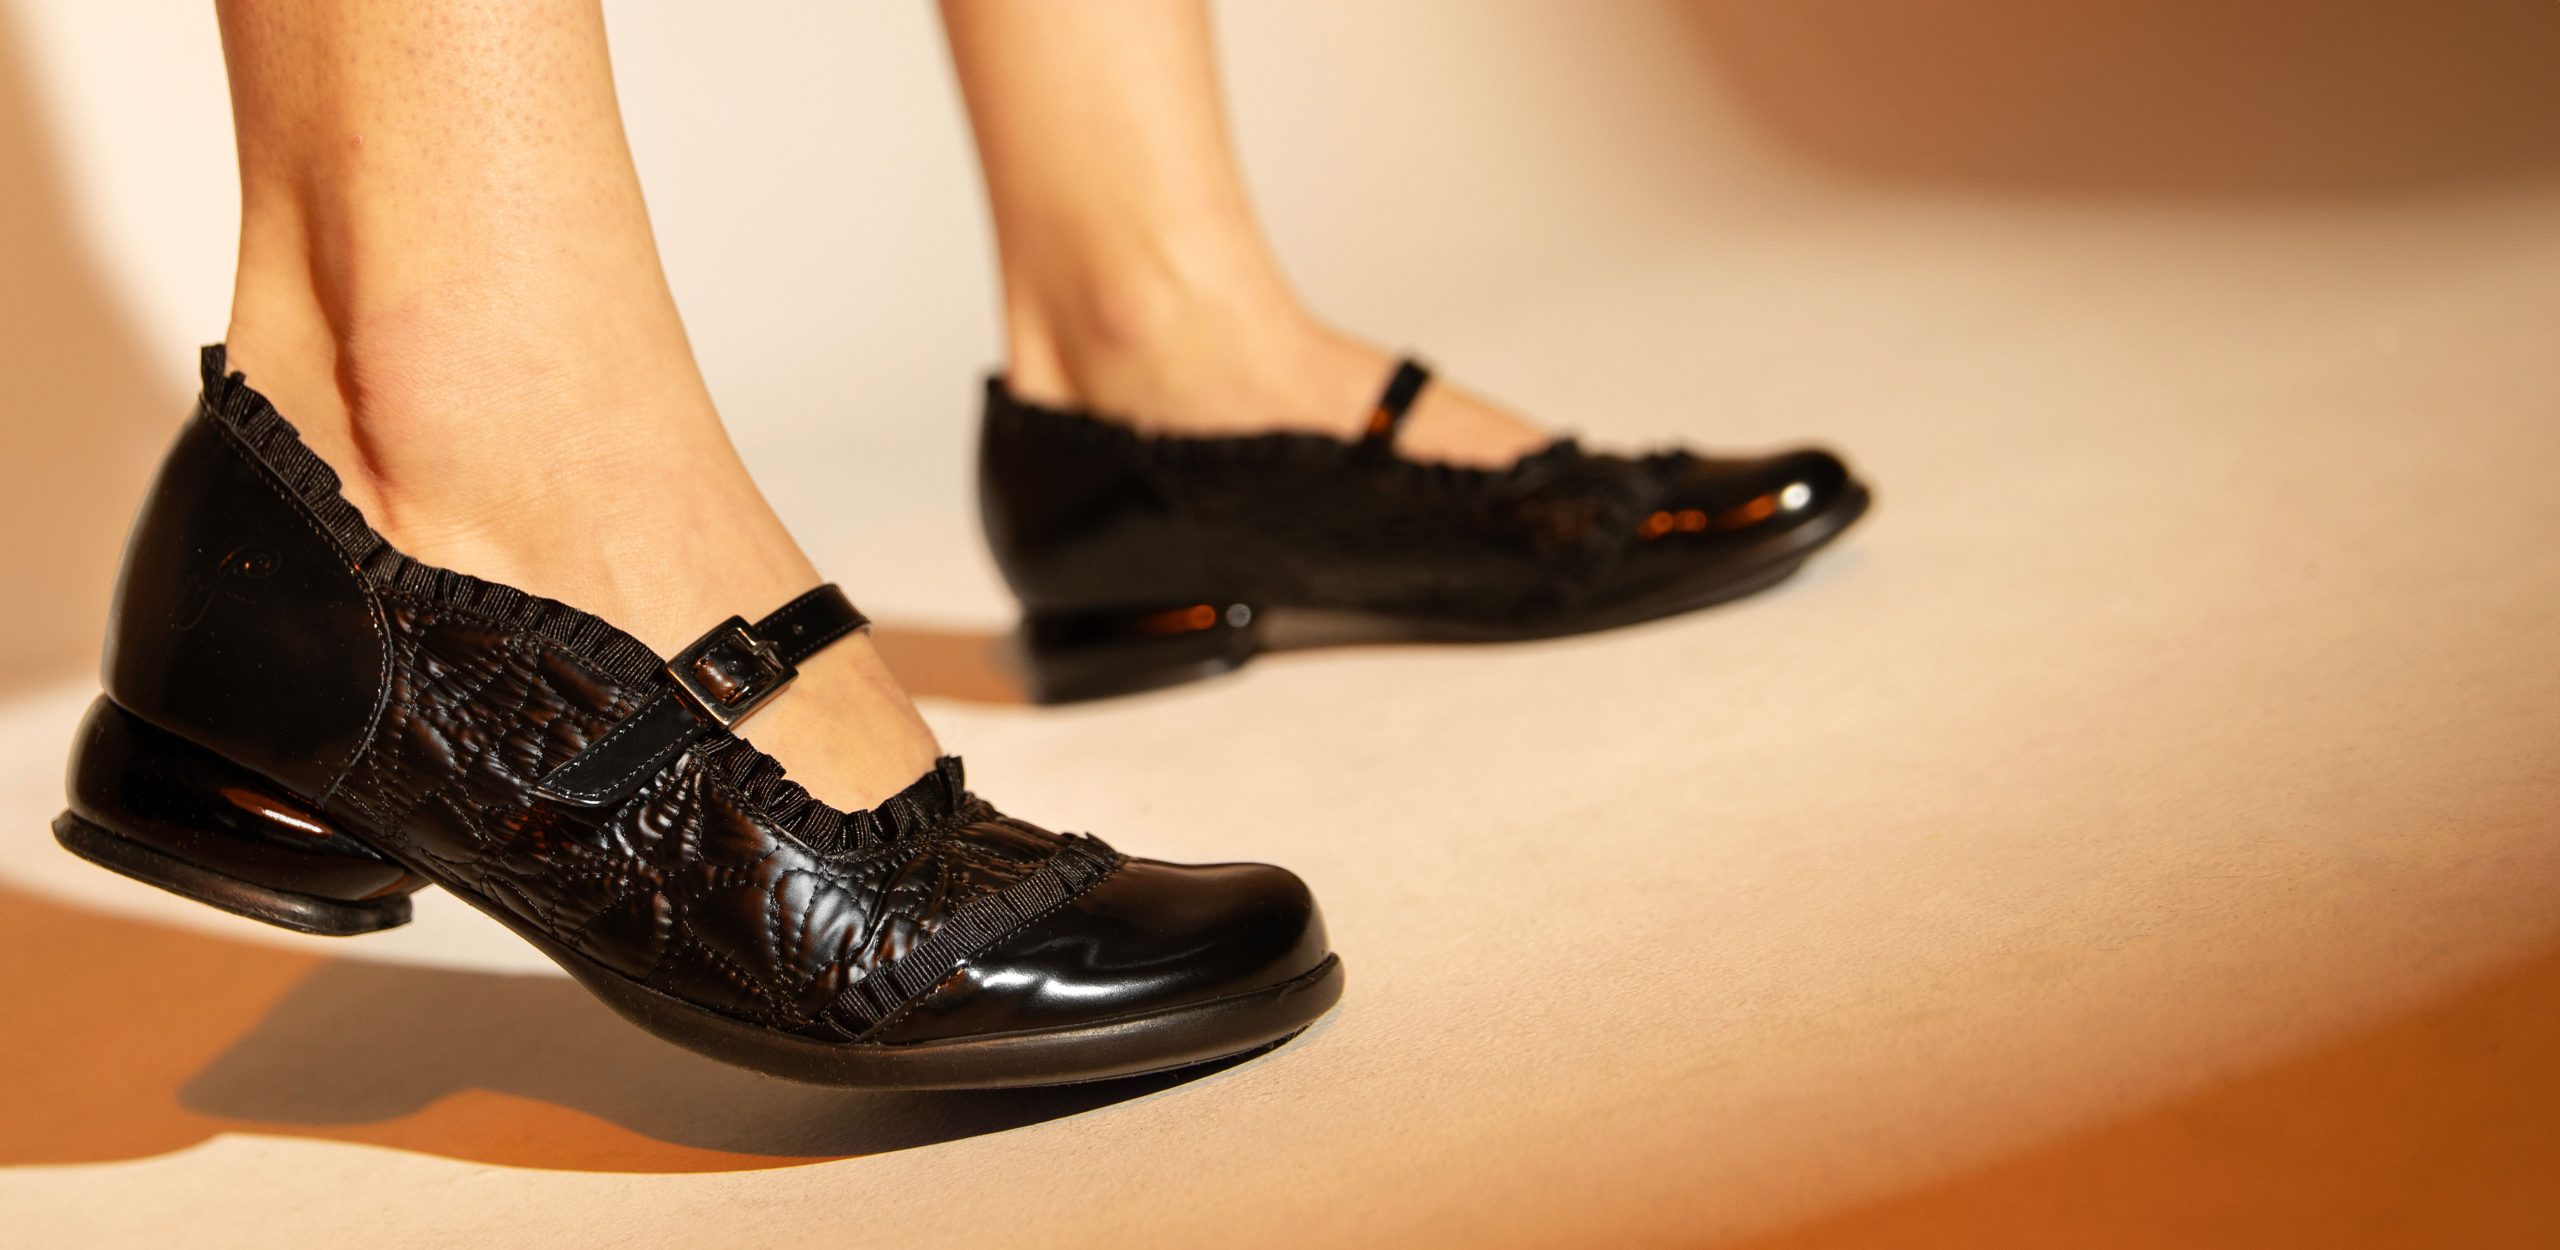 Black John Fluevog Sandz mary-jane shoes, shown from below the ankle. They are quilted and ruffled.